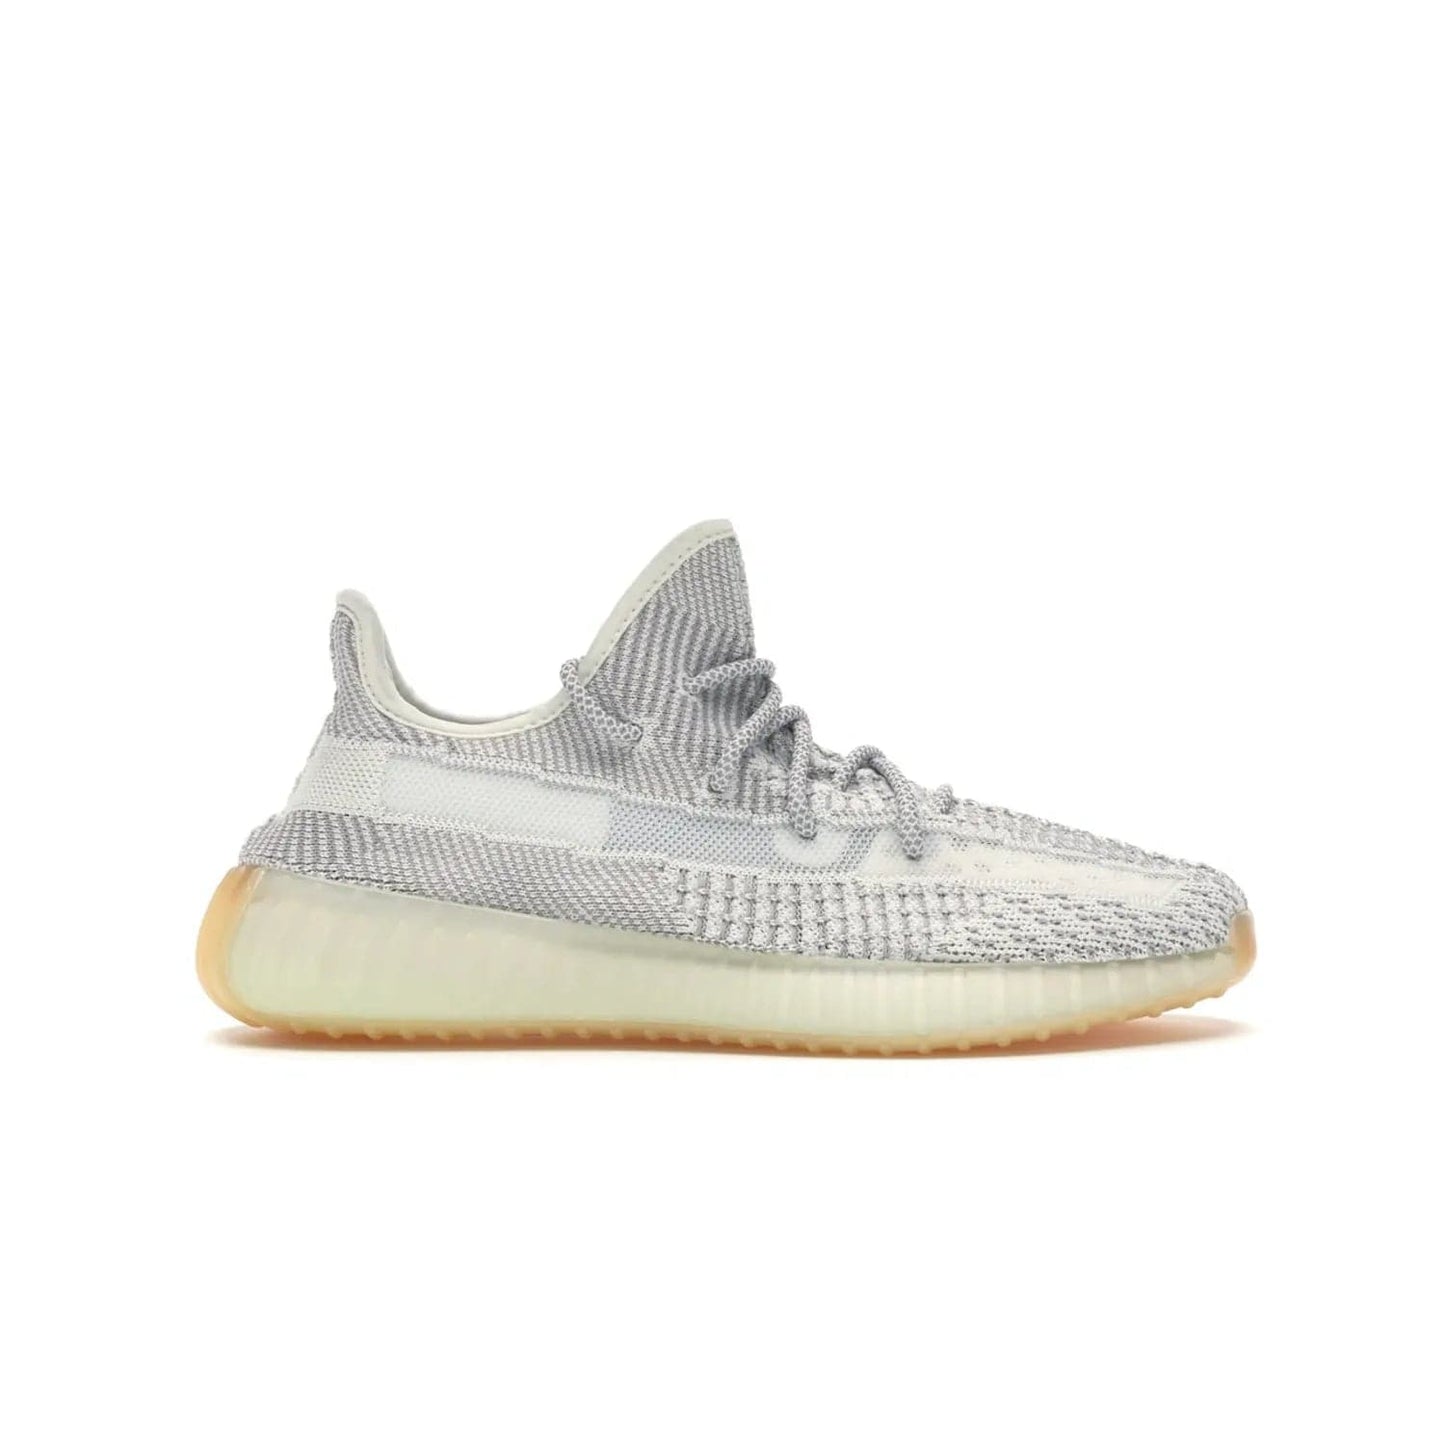 adidas Yeezy Boost 350 V2 Yeshaya (Non-Reflective) - Image 1 - Only at www.BallersClubKickz.com - Step out in style with the adidas Yeezy Boost 350 V2 Yeshaya (Non-Reflective). Gray-and-white Primeknit upper with mesh side stripe & rope laces, plus a translucent Boost sole with a hint of yellow. Make a statement and feel comfortable with this stylish sneaker.